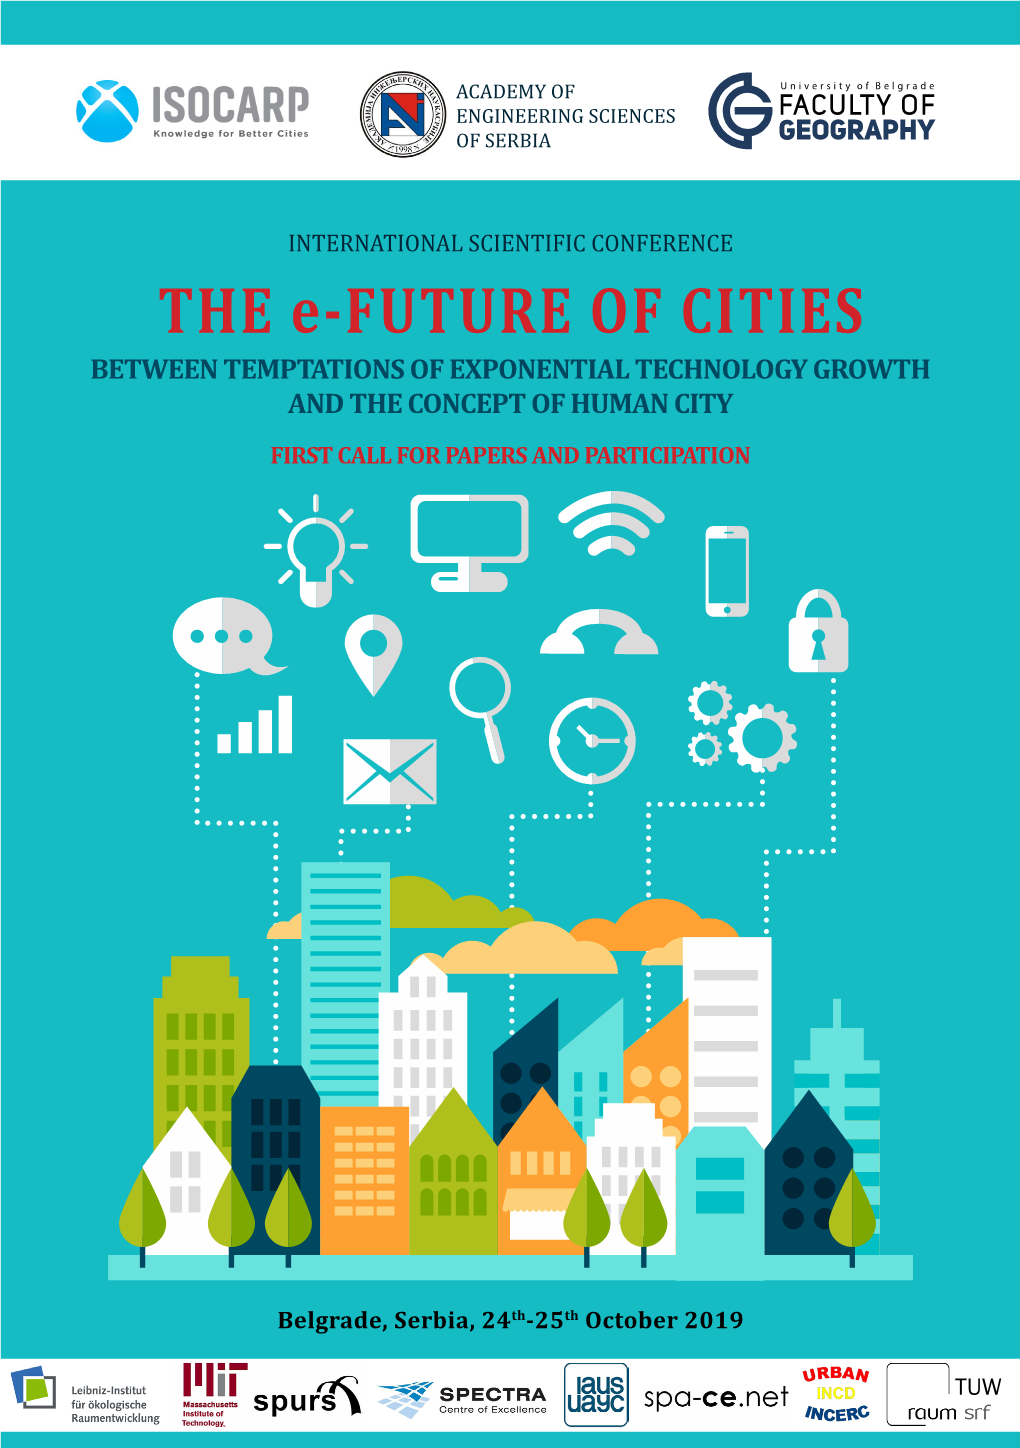 THE E-FUTURE of CITIES Between Temptations of Exponential Technology Growth and the Concept of Human City